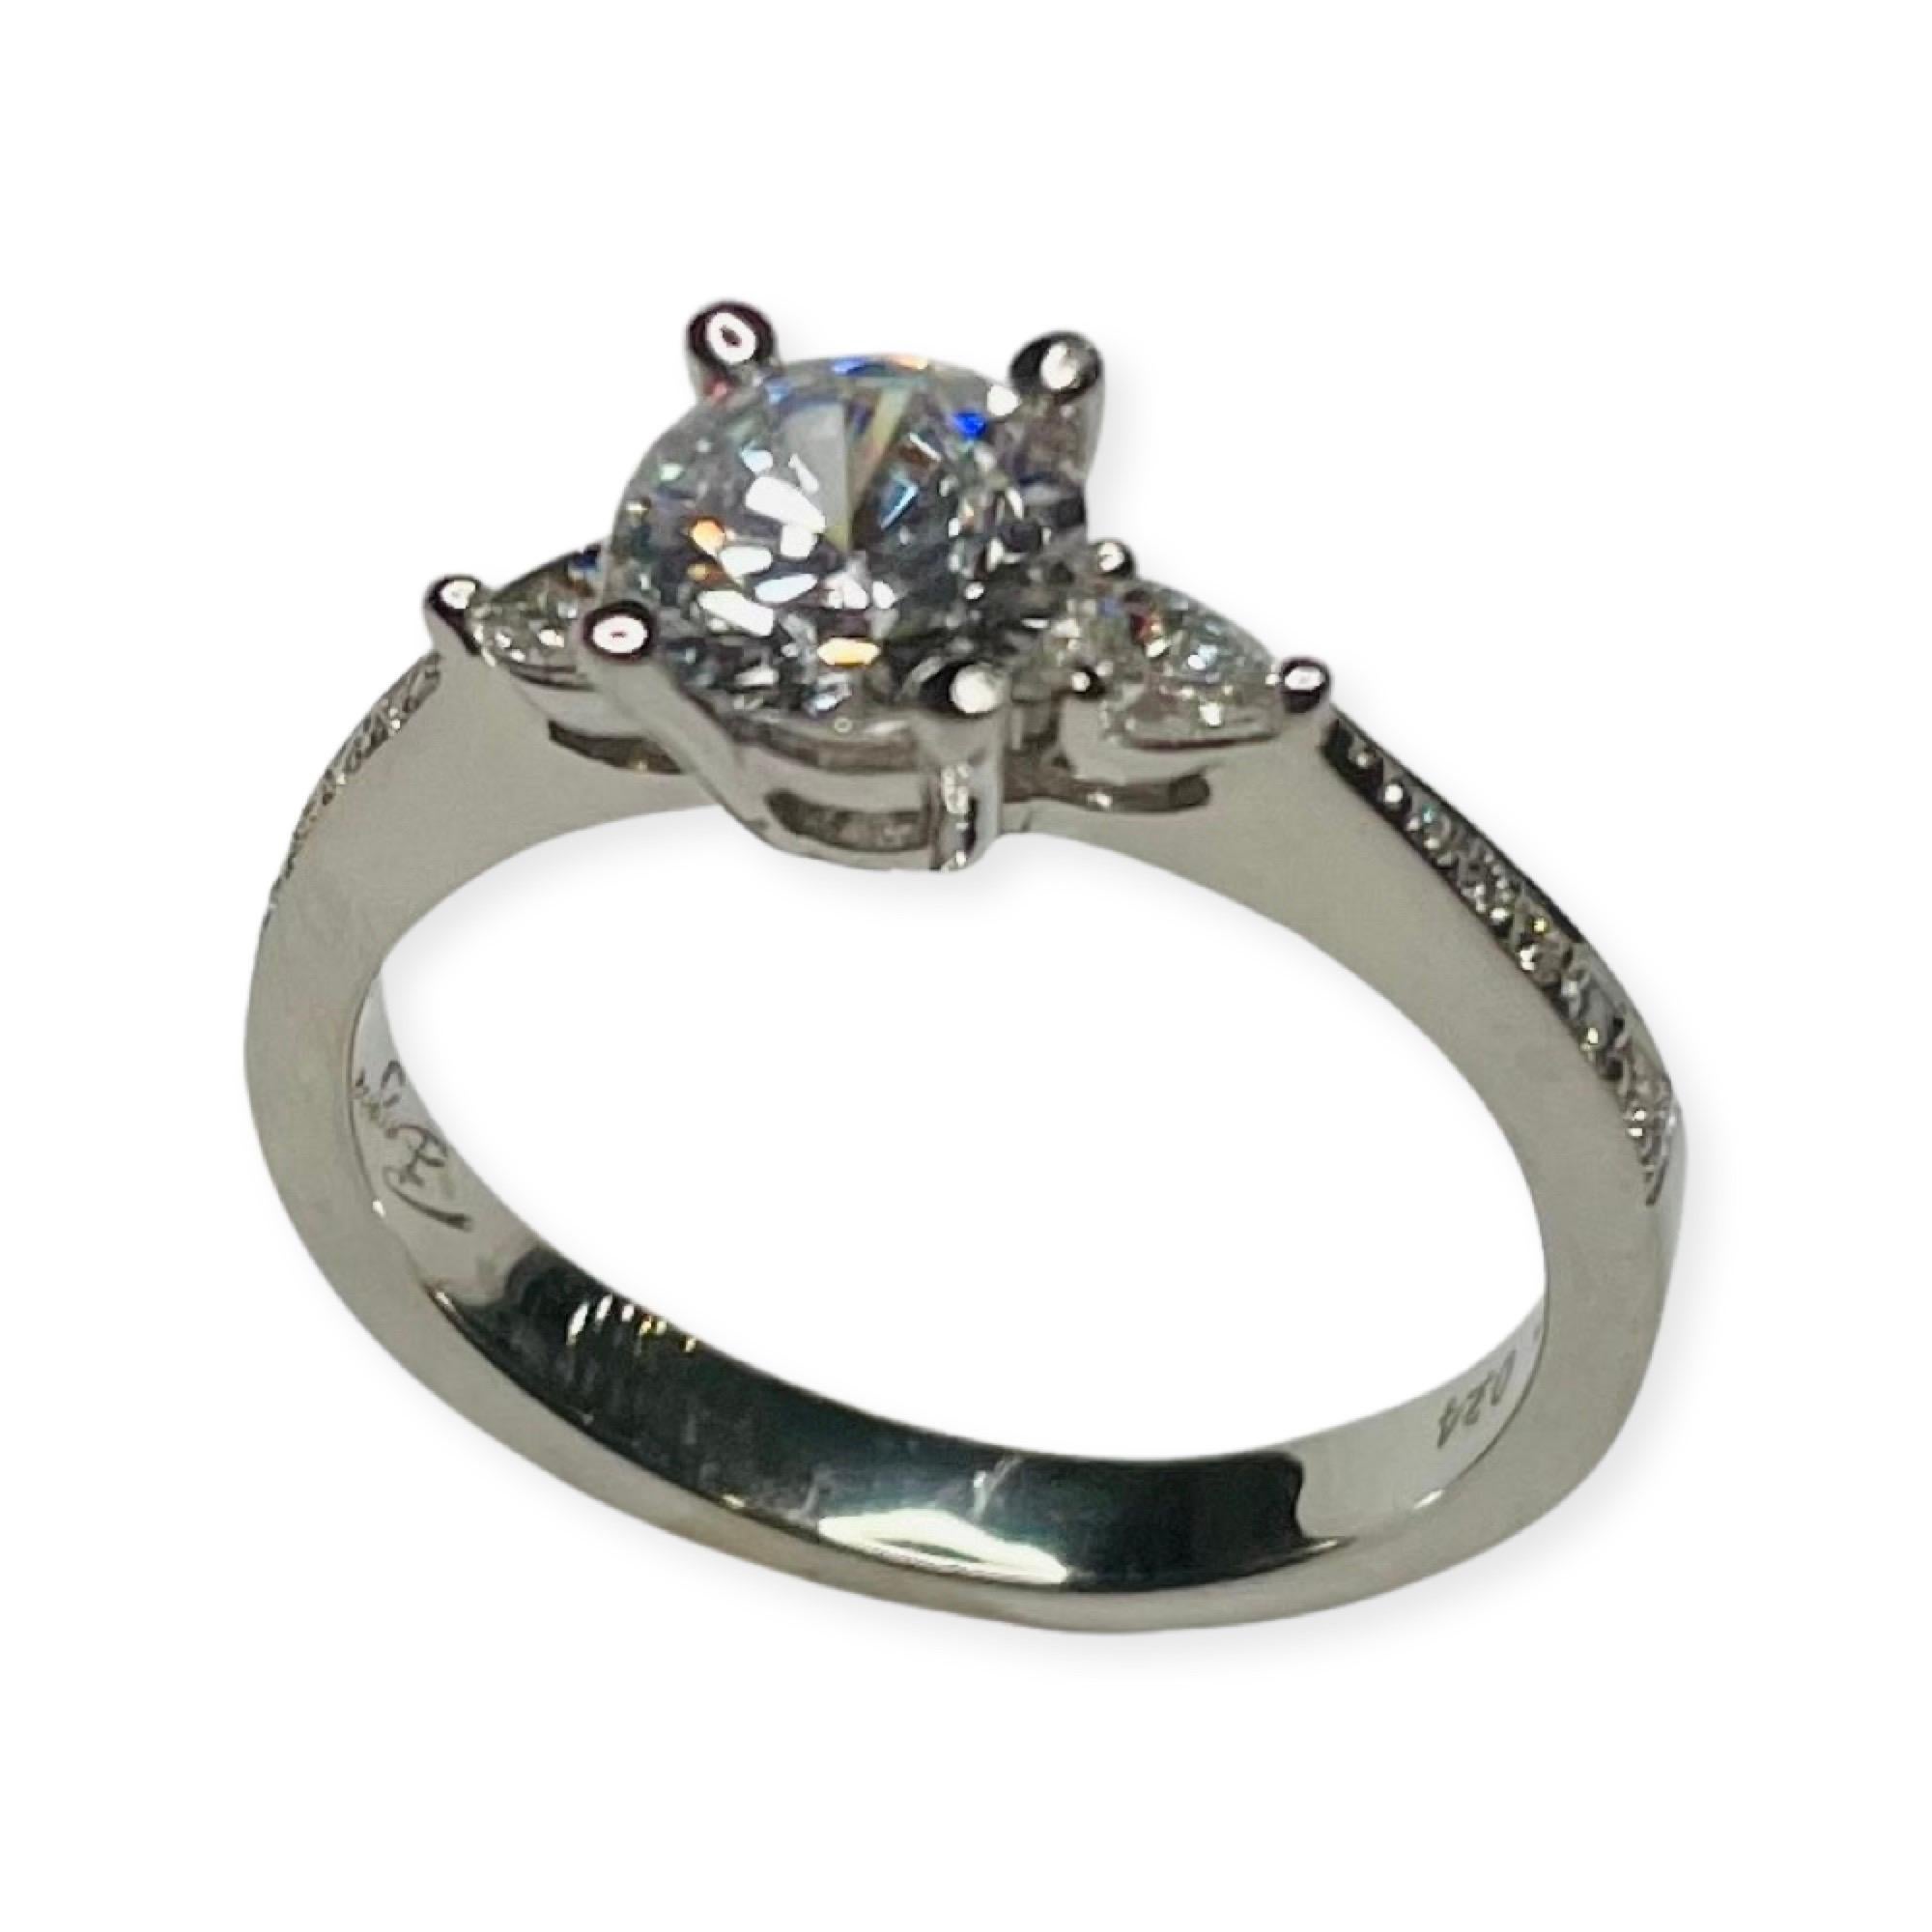 Bergio Platinum and Diamond Engagement Ring. There is an 8.0 mm cubic zirconia center. This is equivalent to a 2.0 carat diamond. There are 2 pear shaped diamonds, 3 prong set and have a total weight of 0.17 carats. There are 10 full cut round